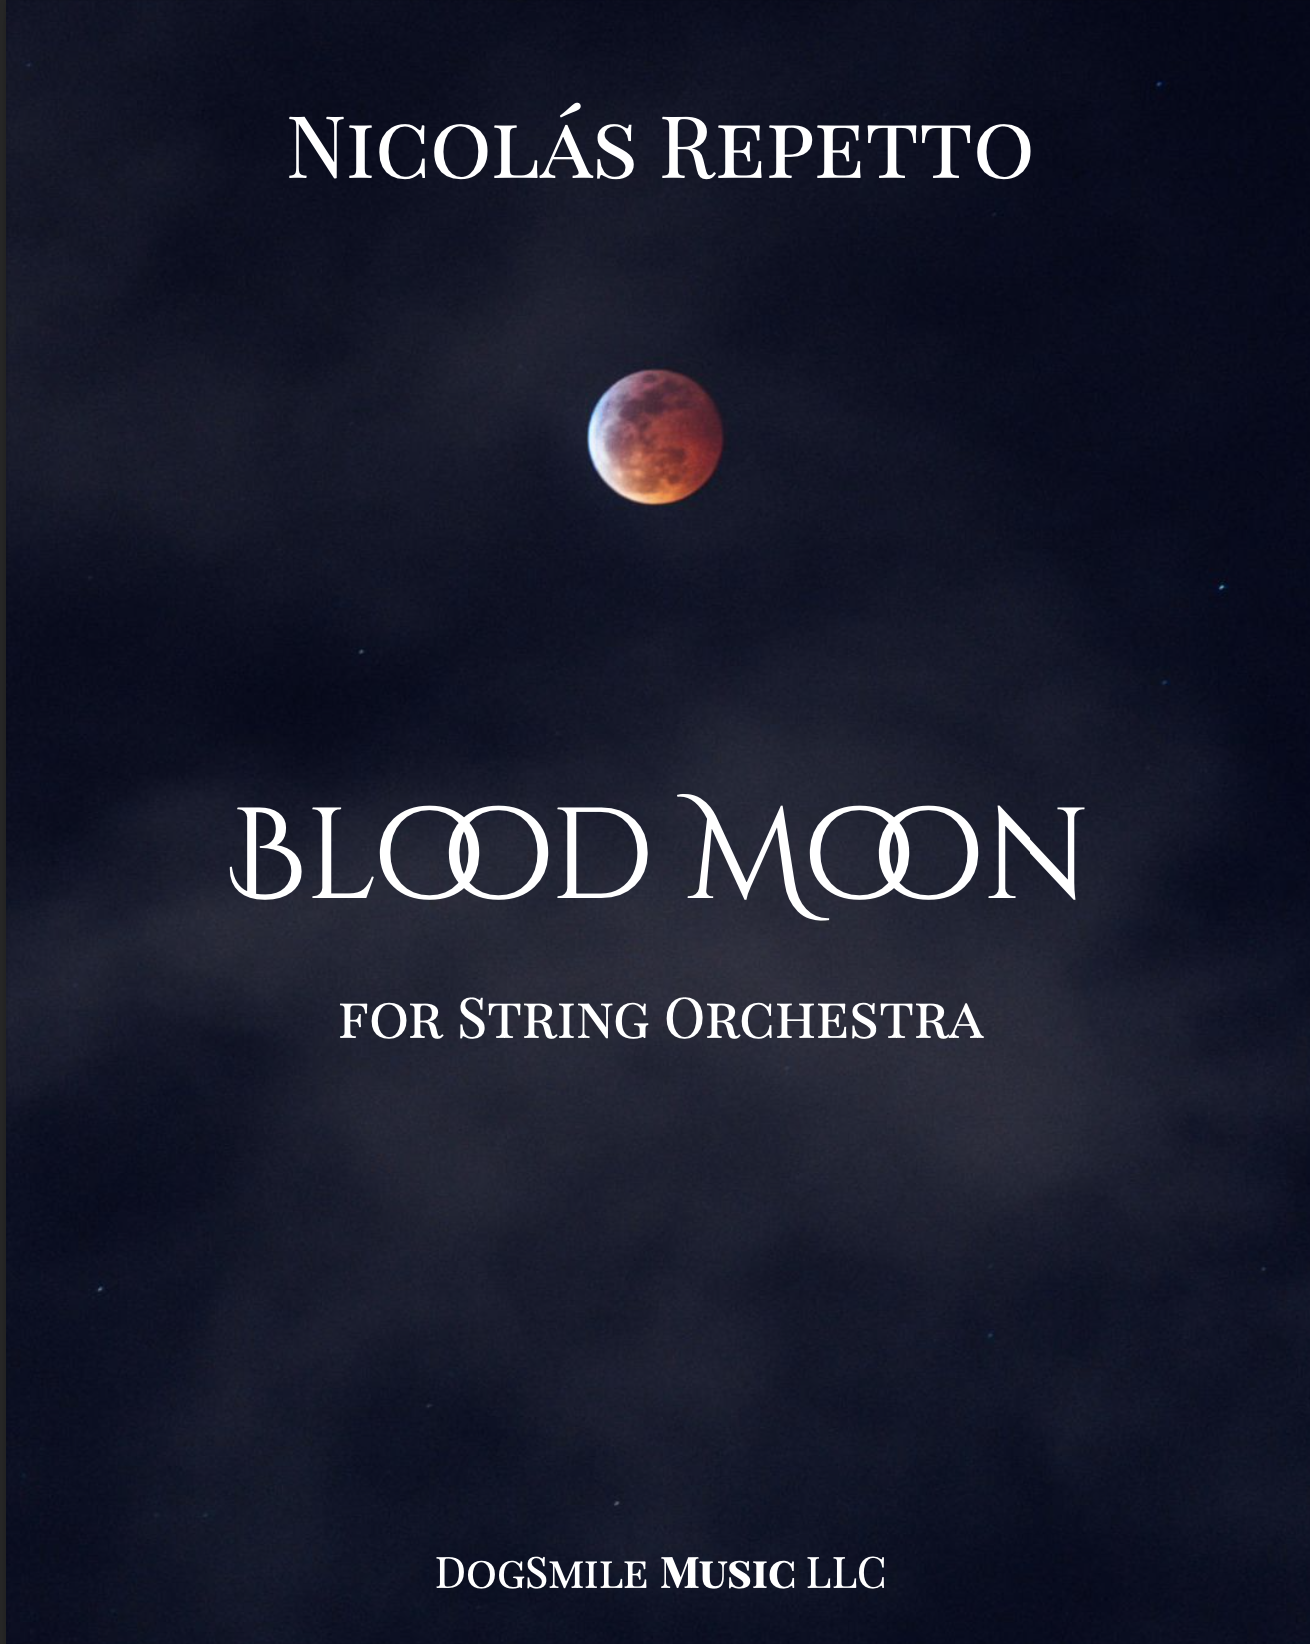 Blood Moon by Nicolas Repetto